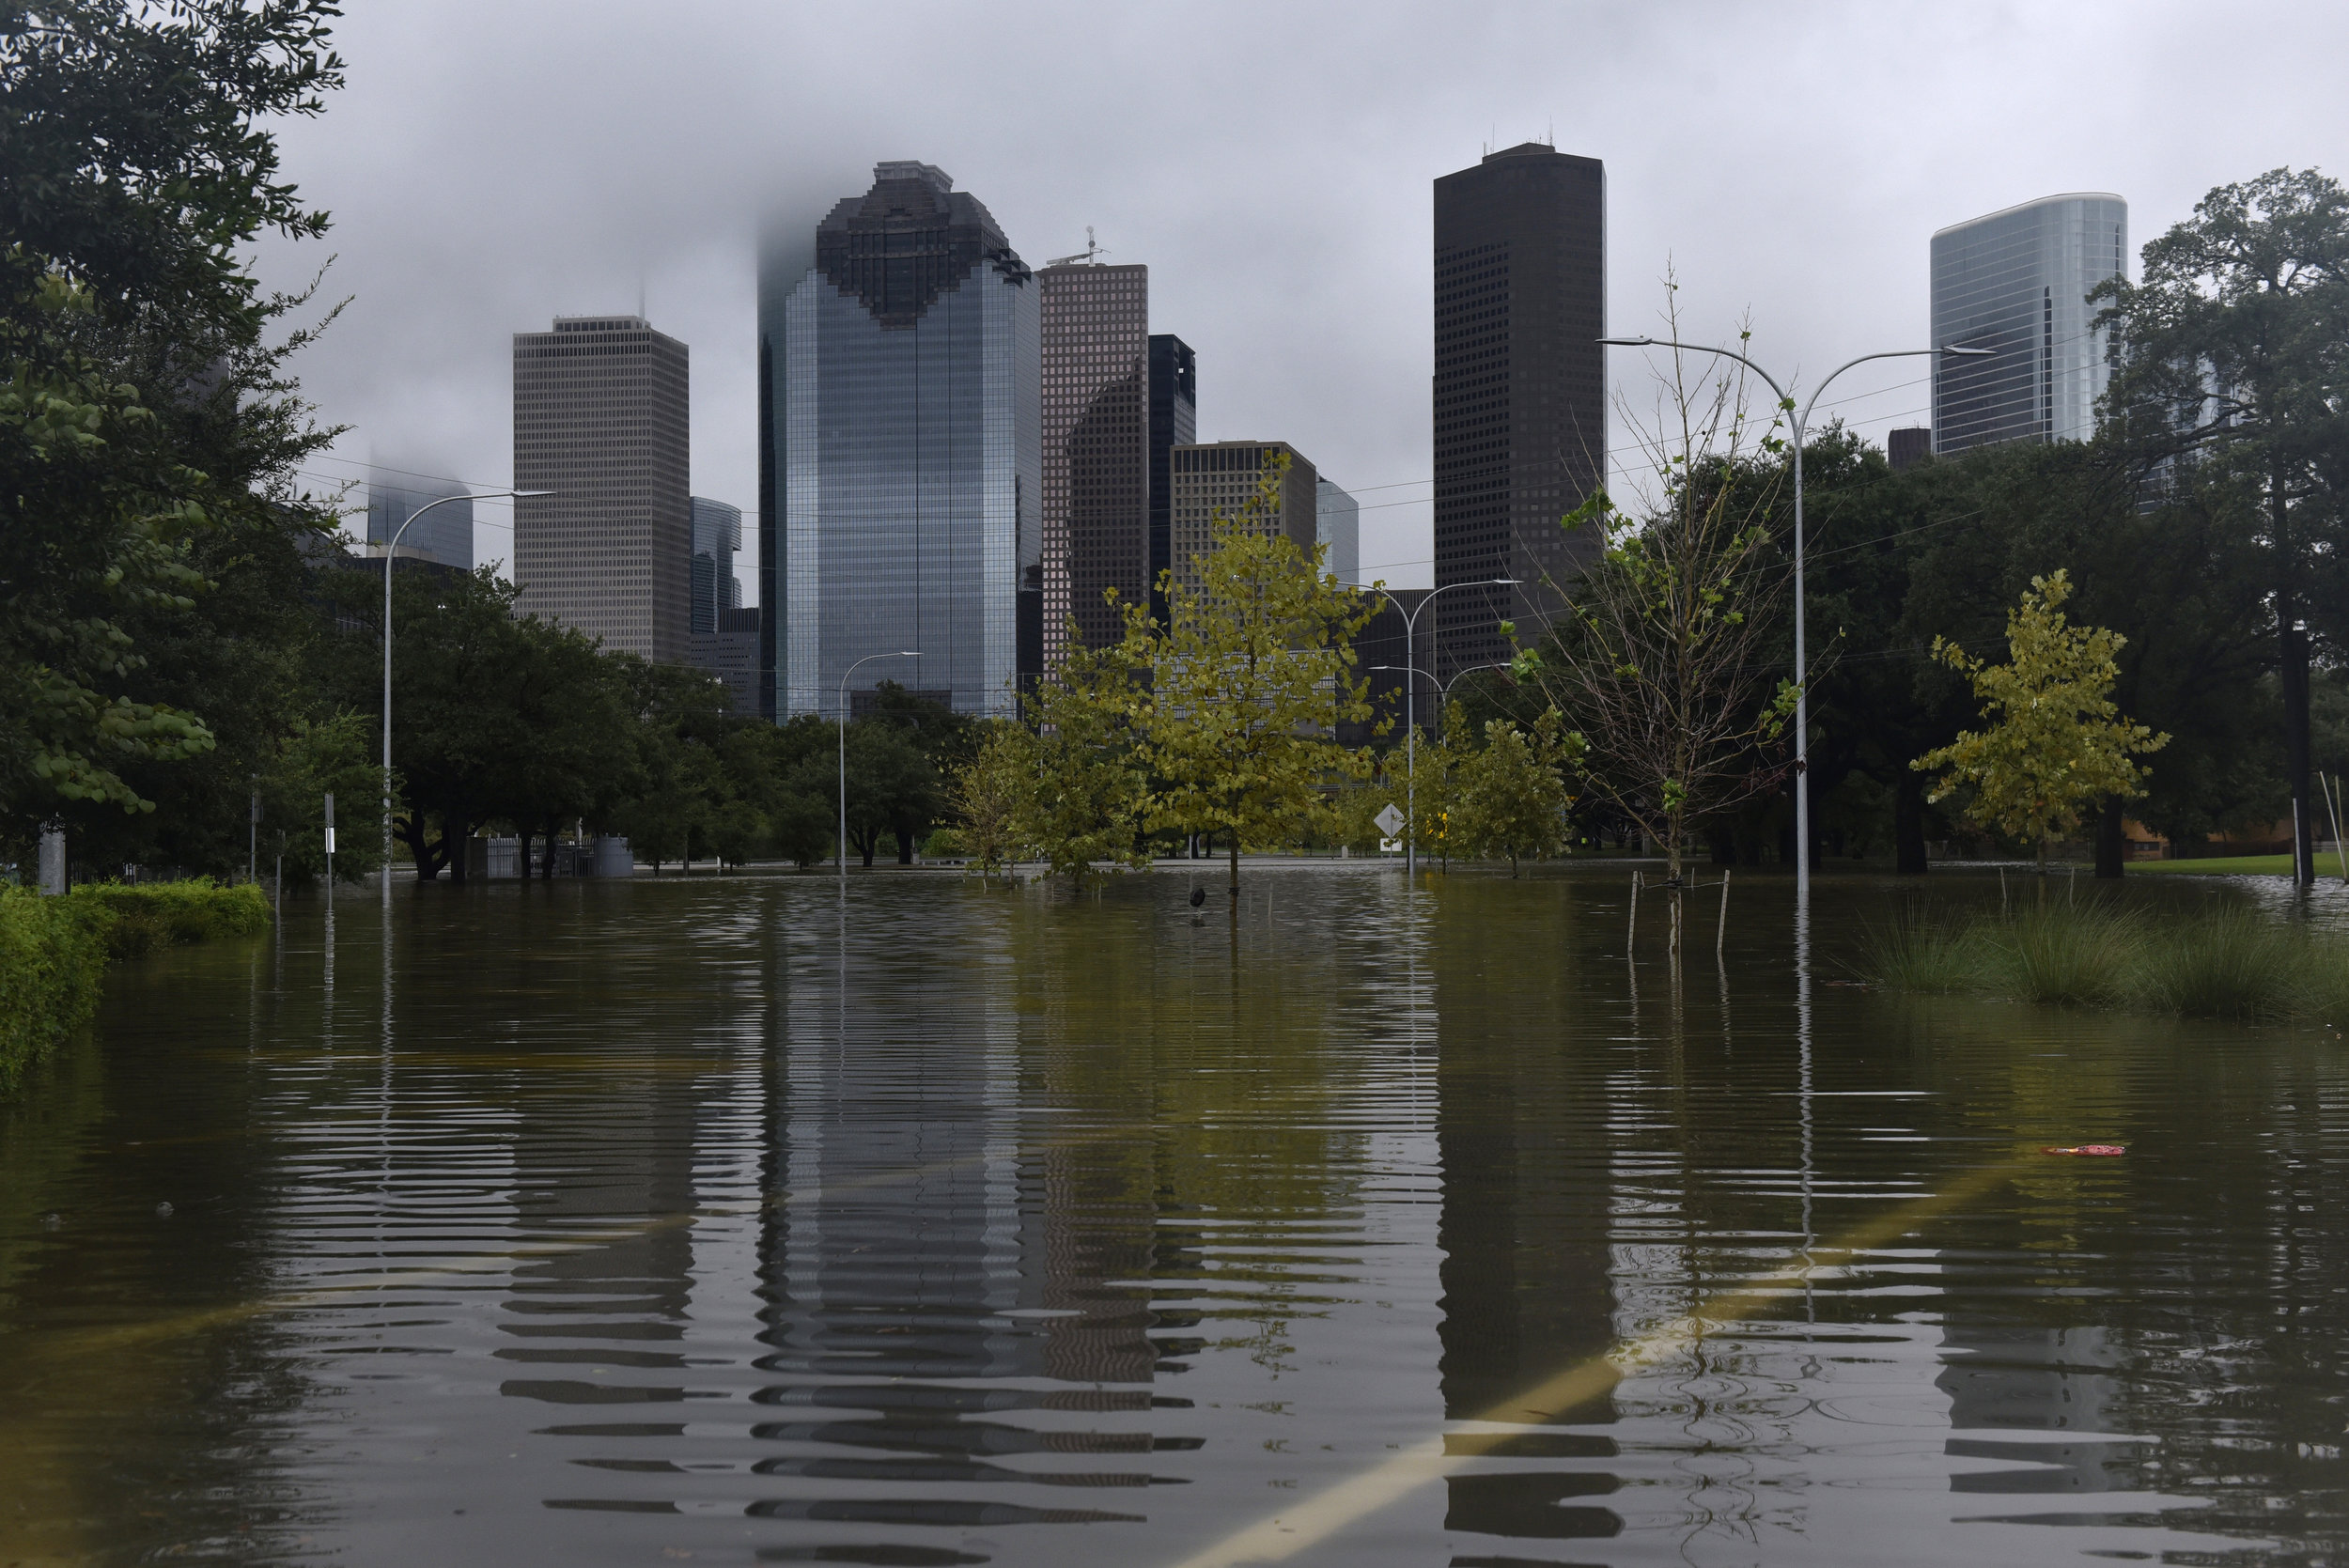  The downtown skyline is reflected in flood water in Buffalo Bayou Park after Hurricane Harvey inundated the Texas Gulf coast with rain causing widespread flooding, in Houston, Texas, U.S. August 27, 2017.  REUTERS/Nick Oxford 